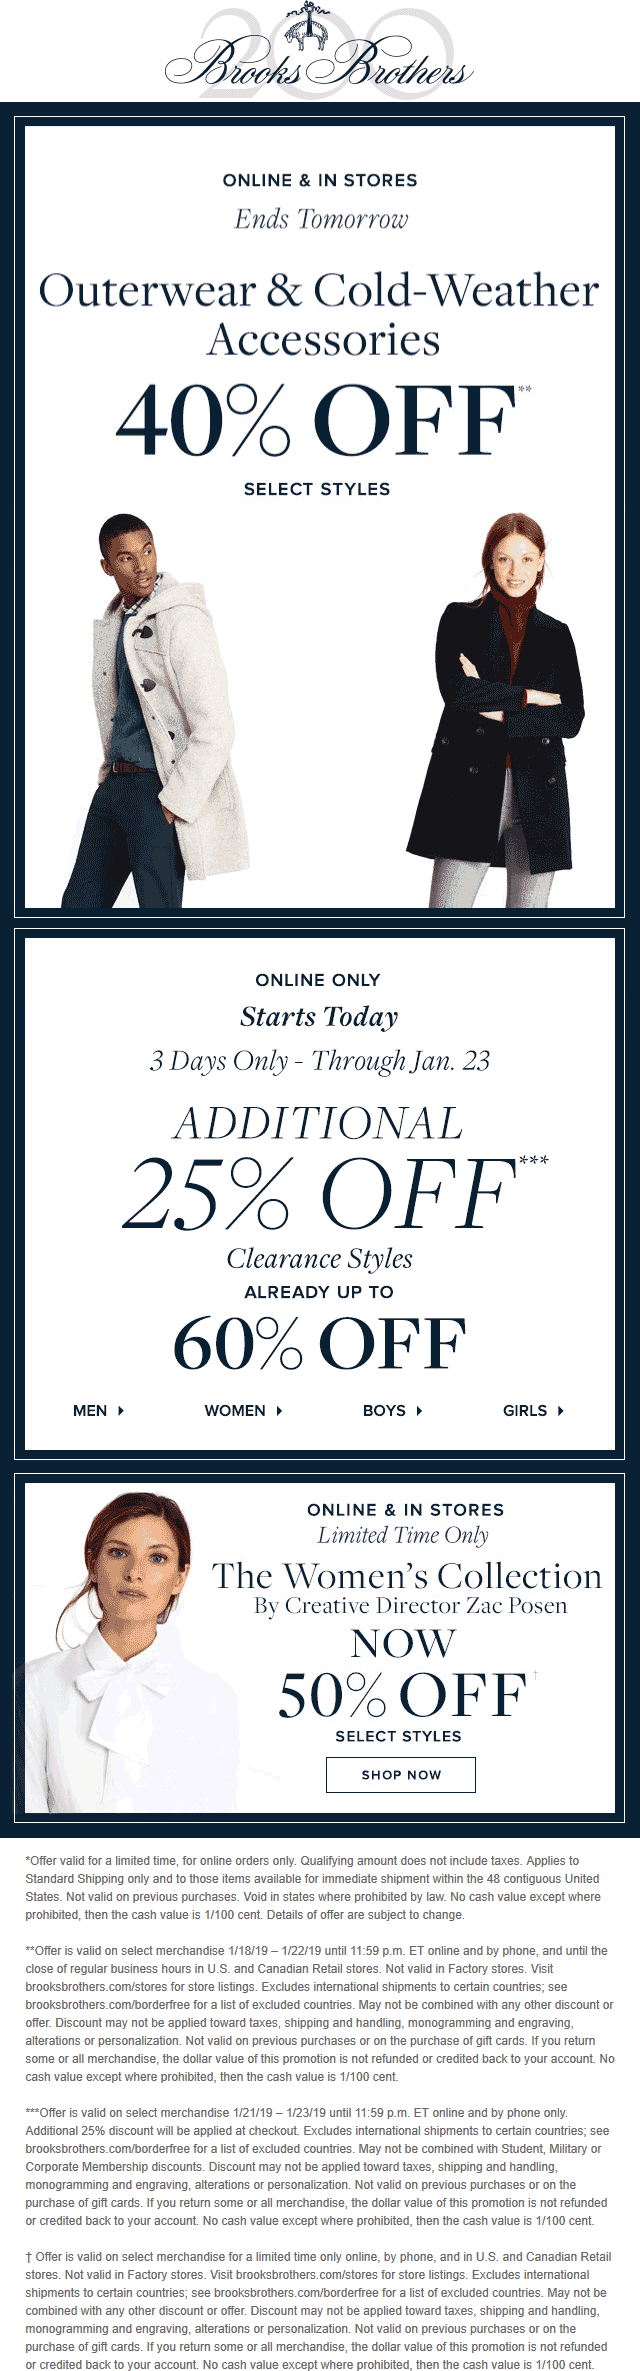 Brooks Brothers coupons & promo code for [May 2022]